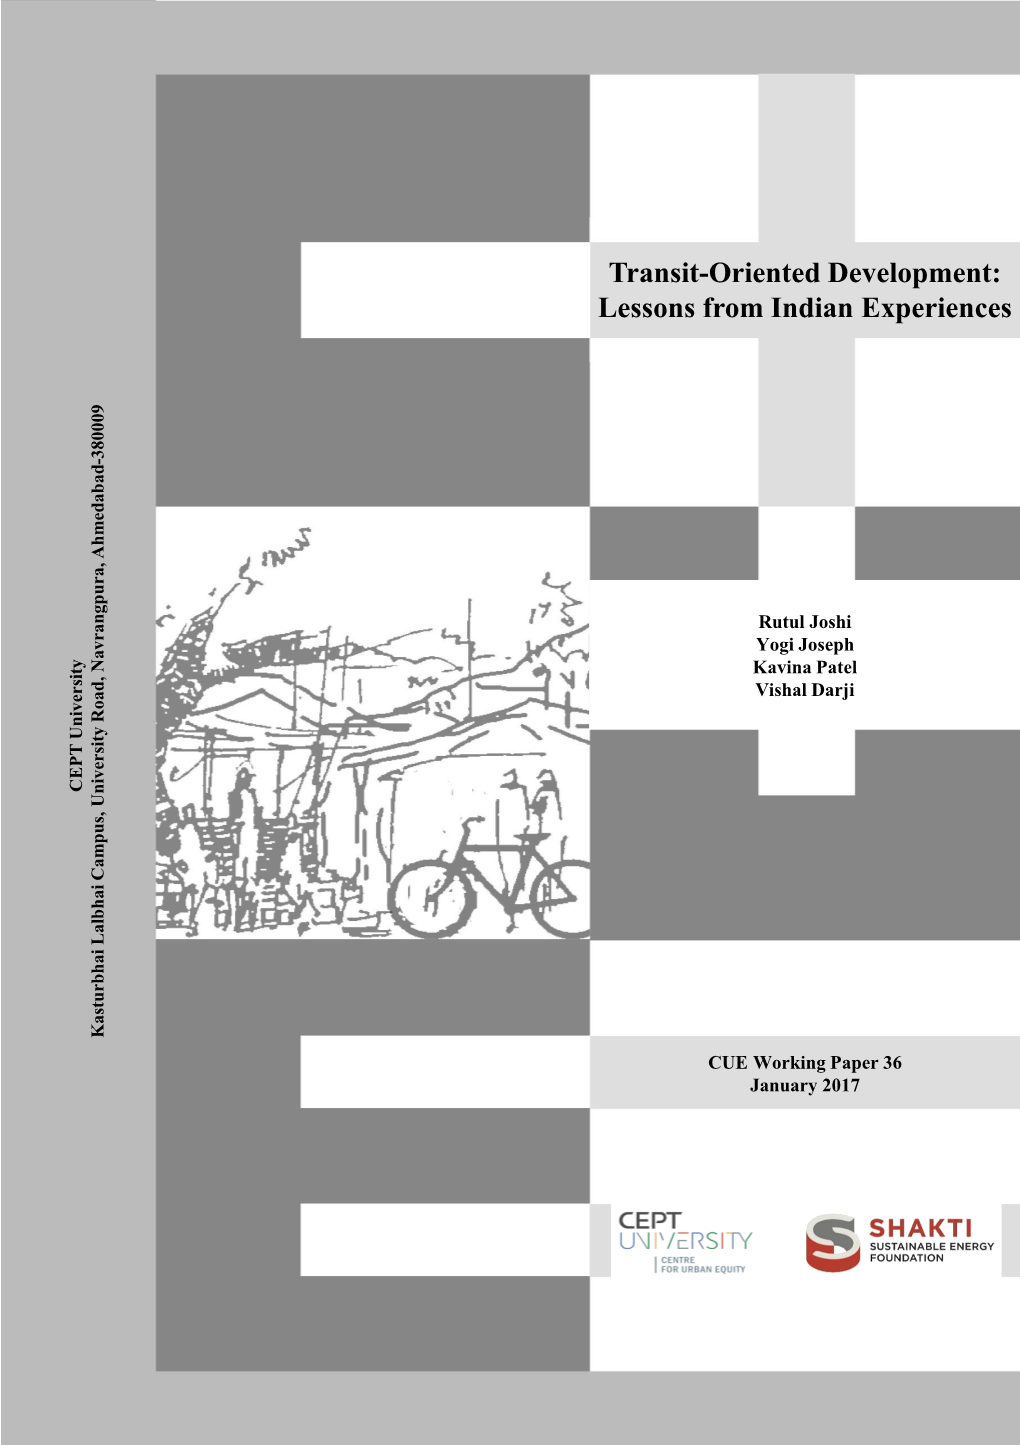 Transit-Oriented Development: Lessons from Indian Experiences